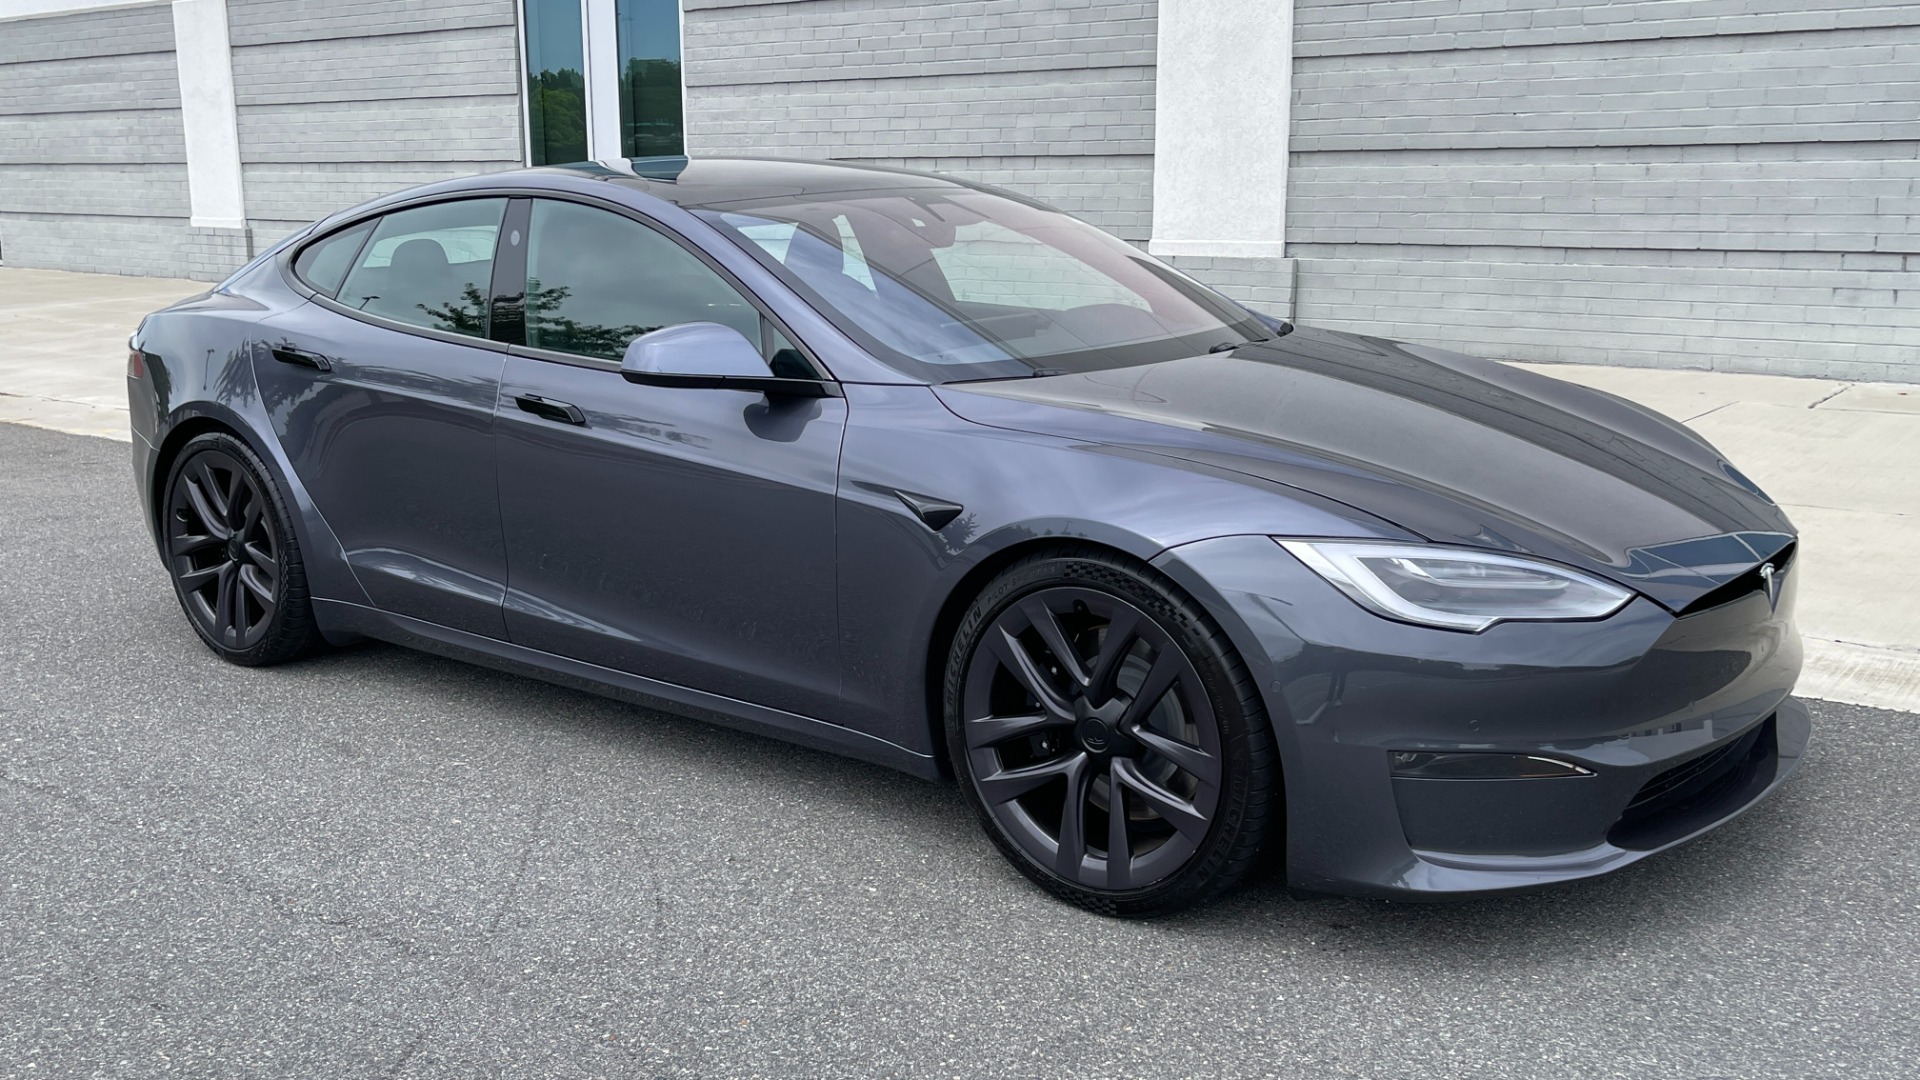 Used 2021 Tesla Model S Plaid / FULL SELF DRIVING / 21IN WHEELS / CARBON FIBER TRIM / PREMIUM CONNE for sale $105,000 at Formula Imports in Charlotte NC 28227 7